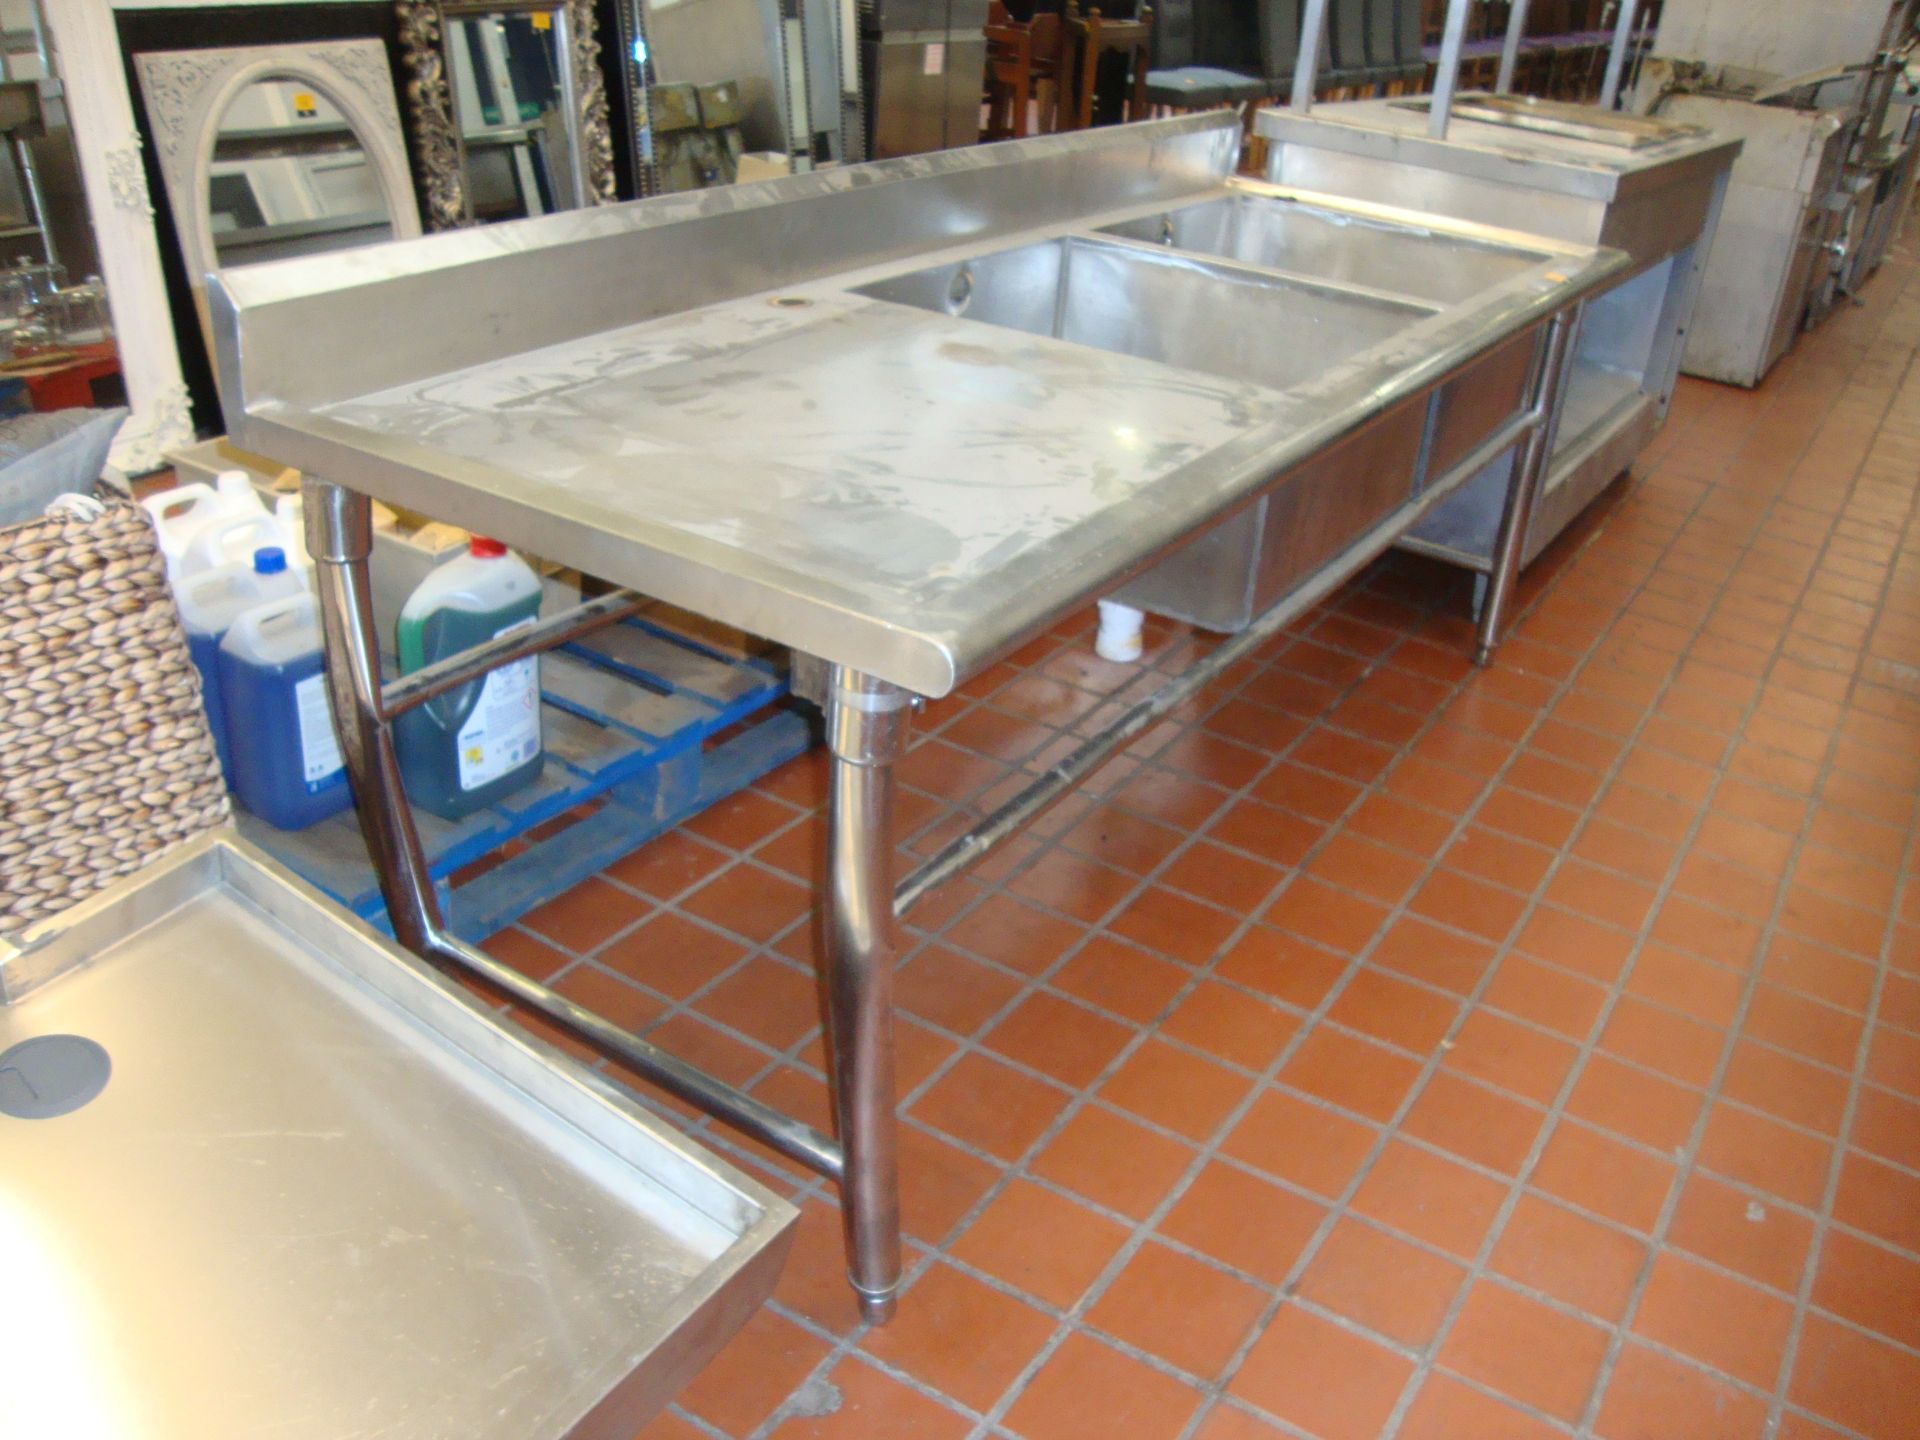 Large freestanding stainless steel twin bowl sink with max dimensions circa 87" x 31.5" x 37" - Image 2 of 3